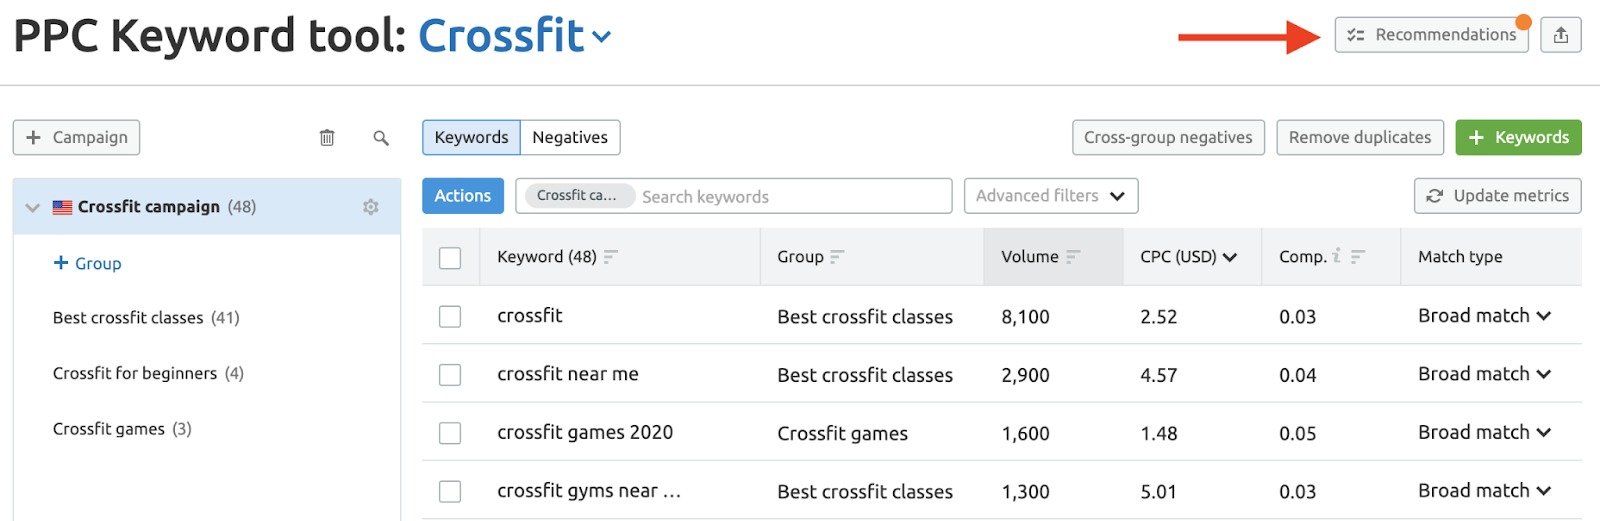 PPC Keyword Tool recommendations for "crossfit"